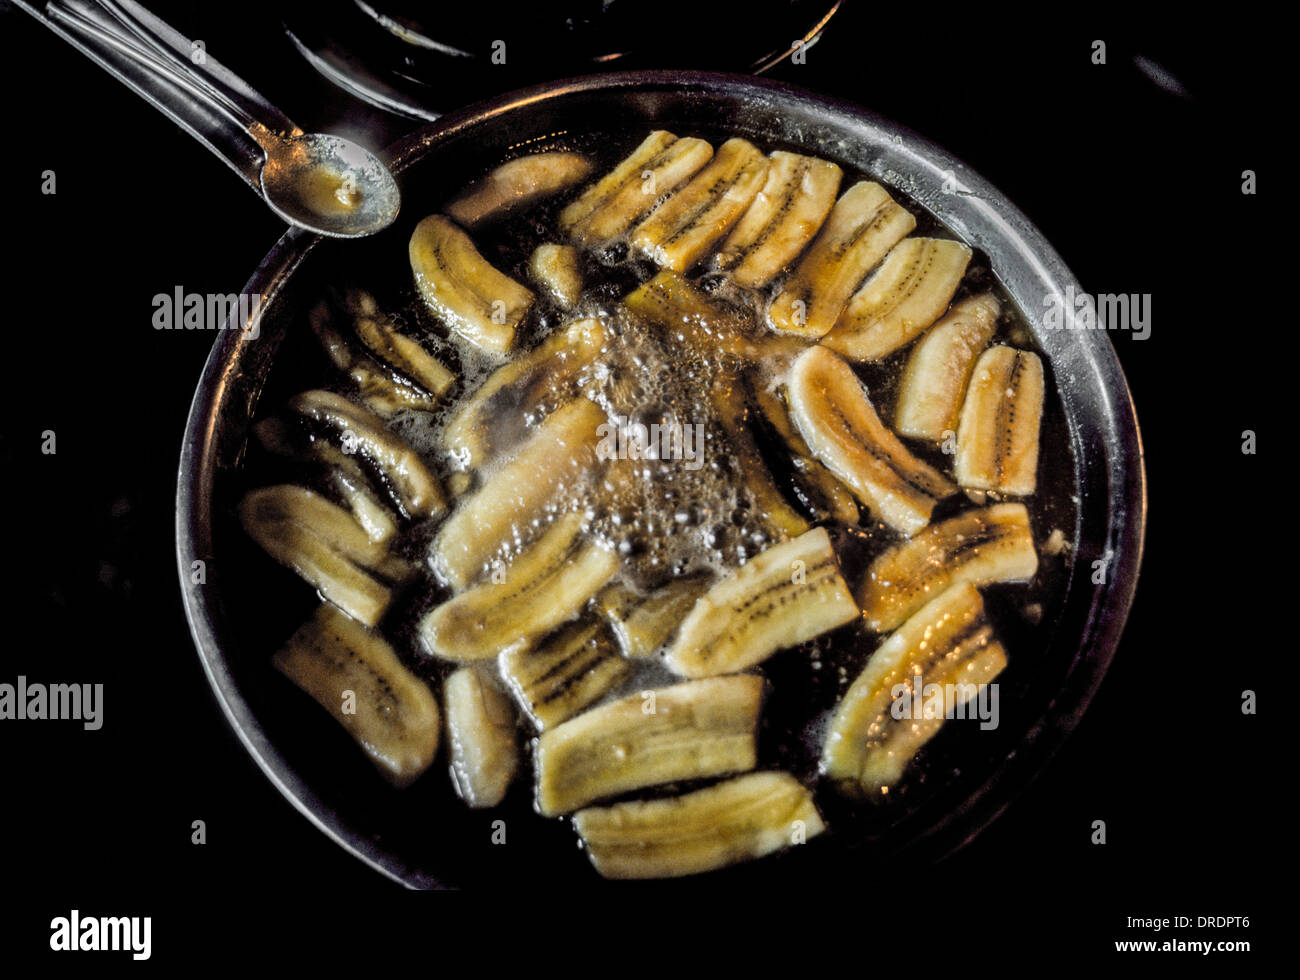 Bananas Foster is prepared in a pan at Brennan's Restaurant in New Orleans, Louisiana, where the dessert originated in 1951. Stock Photo